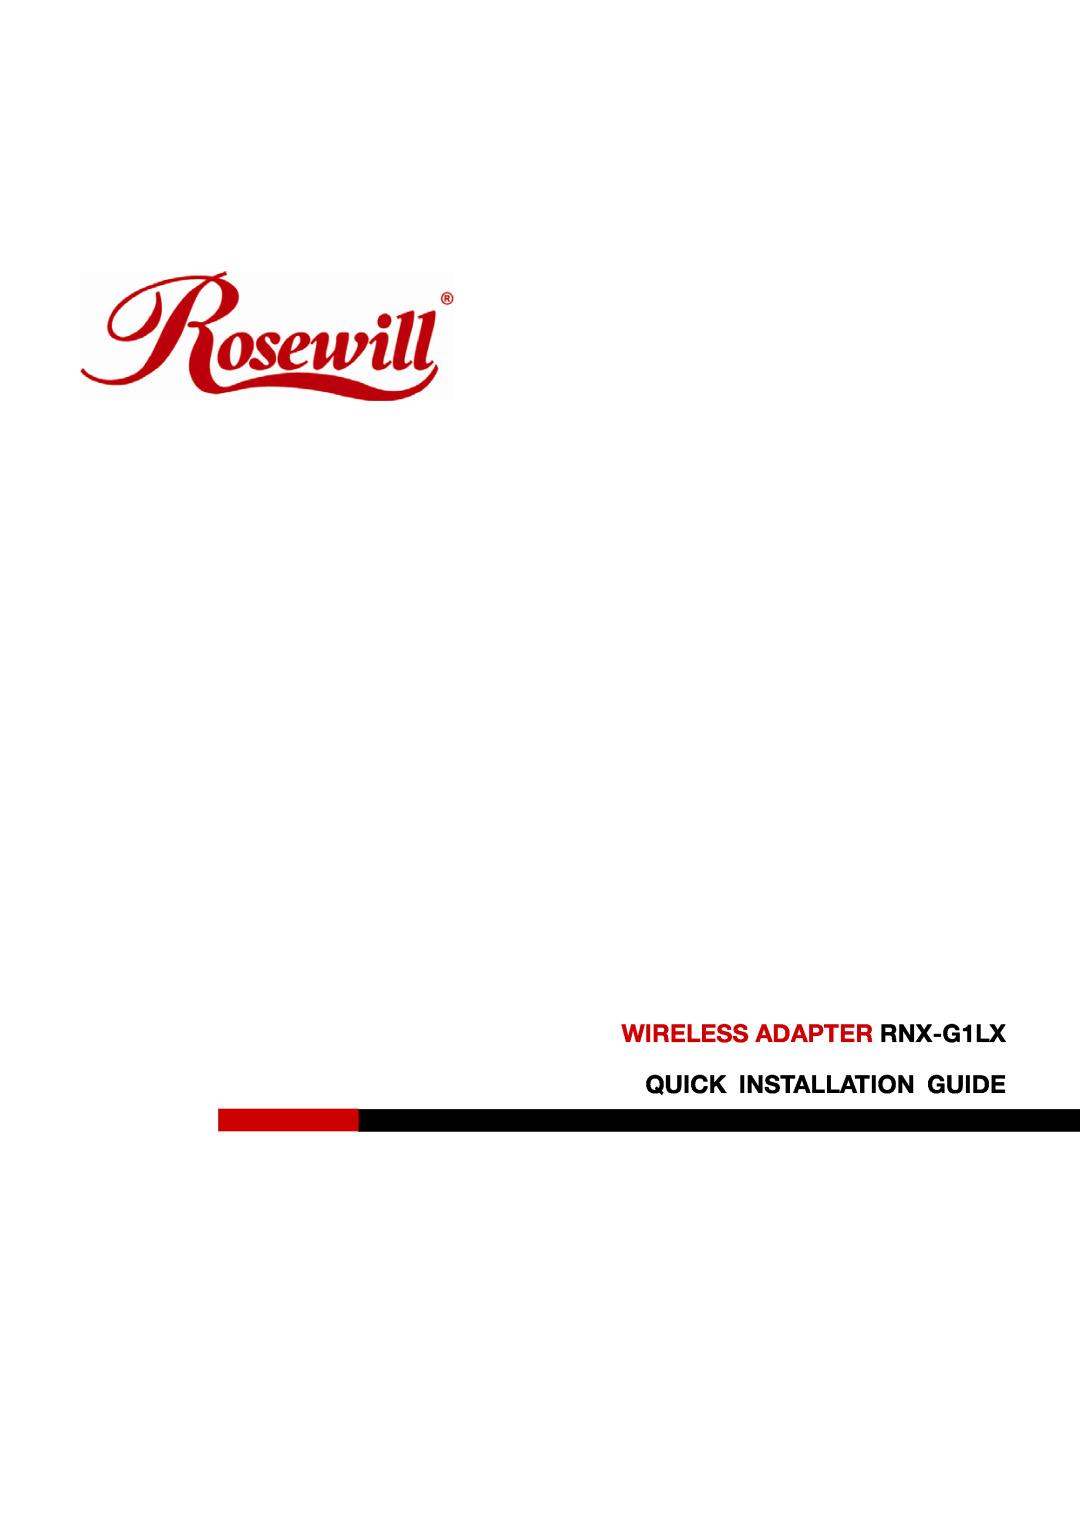 Rosewill RNX-G1/G1W manual Quick Installation Guide, WIRELESS ADAPTER RNX-G1LX 